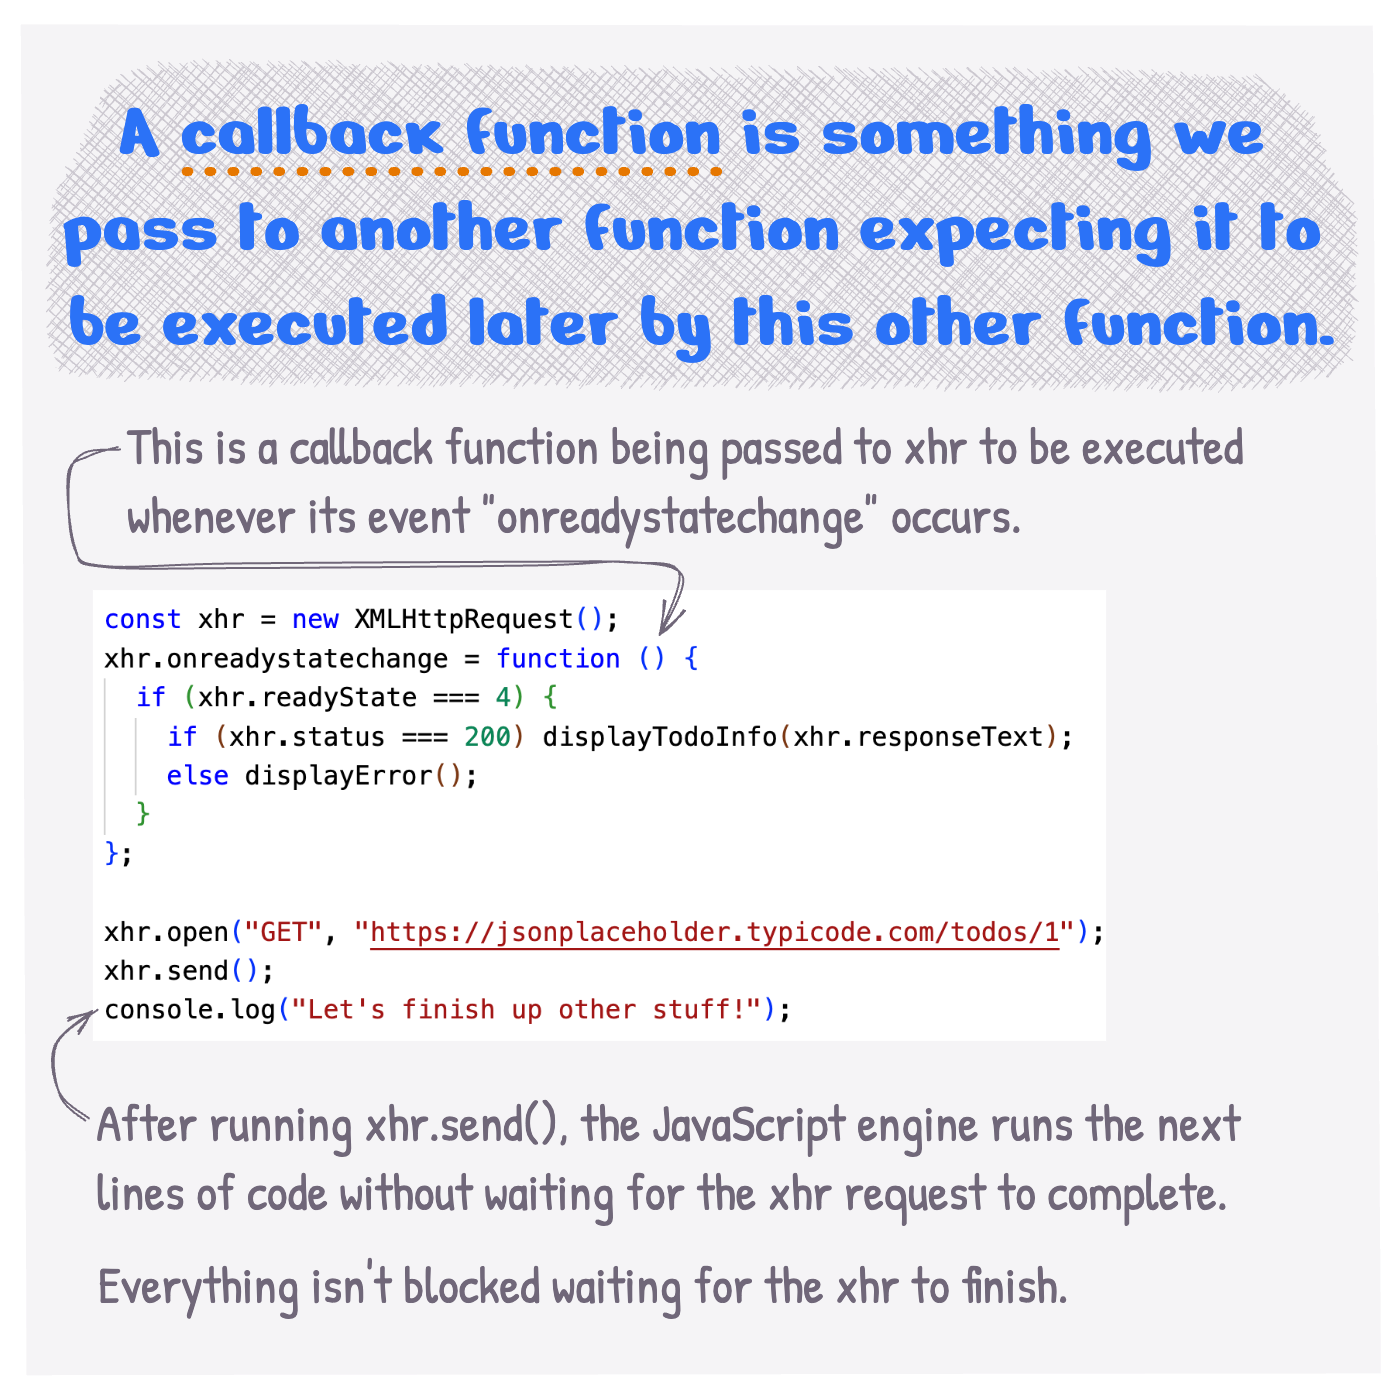 A callback function is something we pass to another function expecting it to be executed later by this other function.